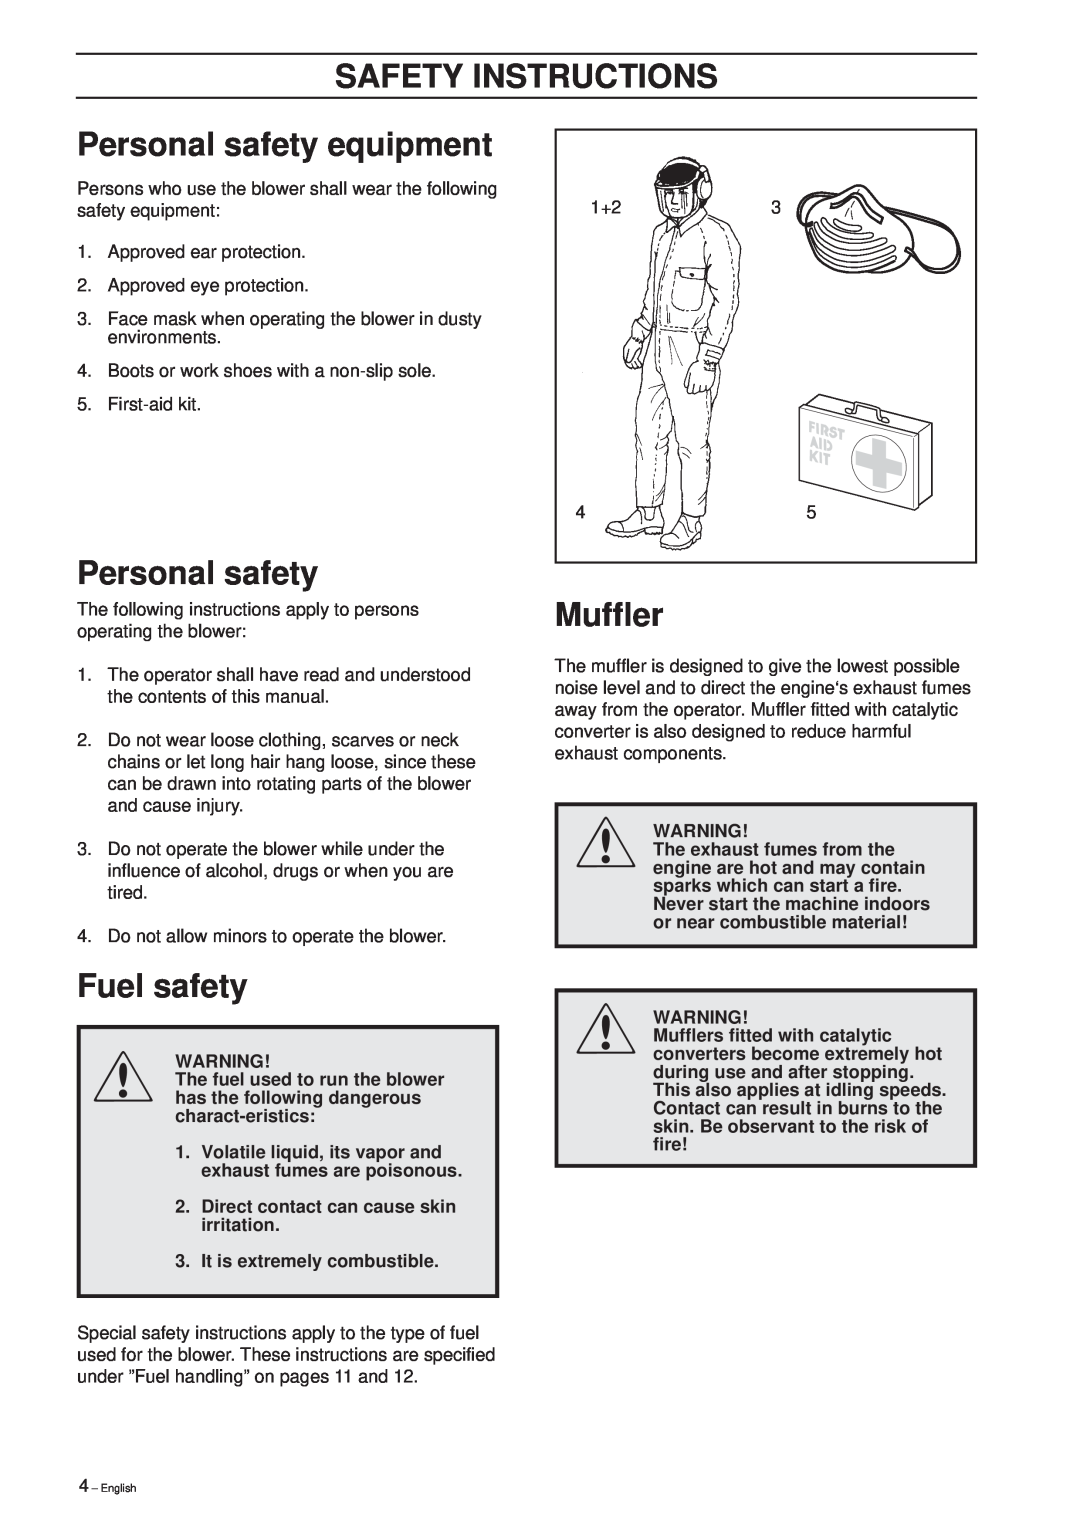 Husqvarna 225 HBV manual Safety Instructions, Personal safety equipment, Fuel safety, Muffler 